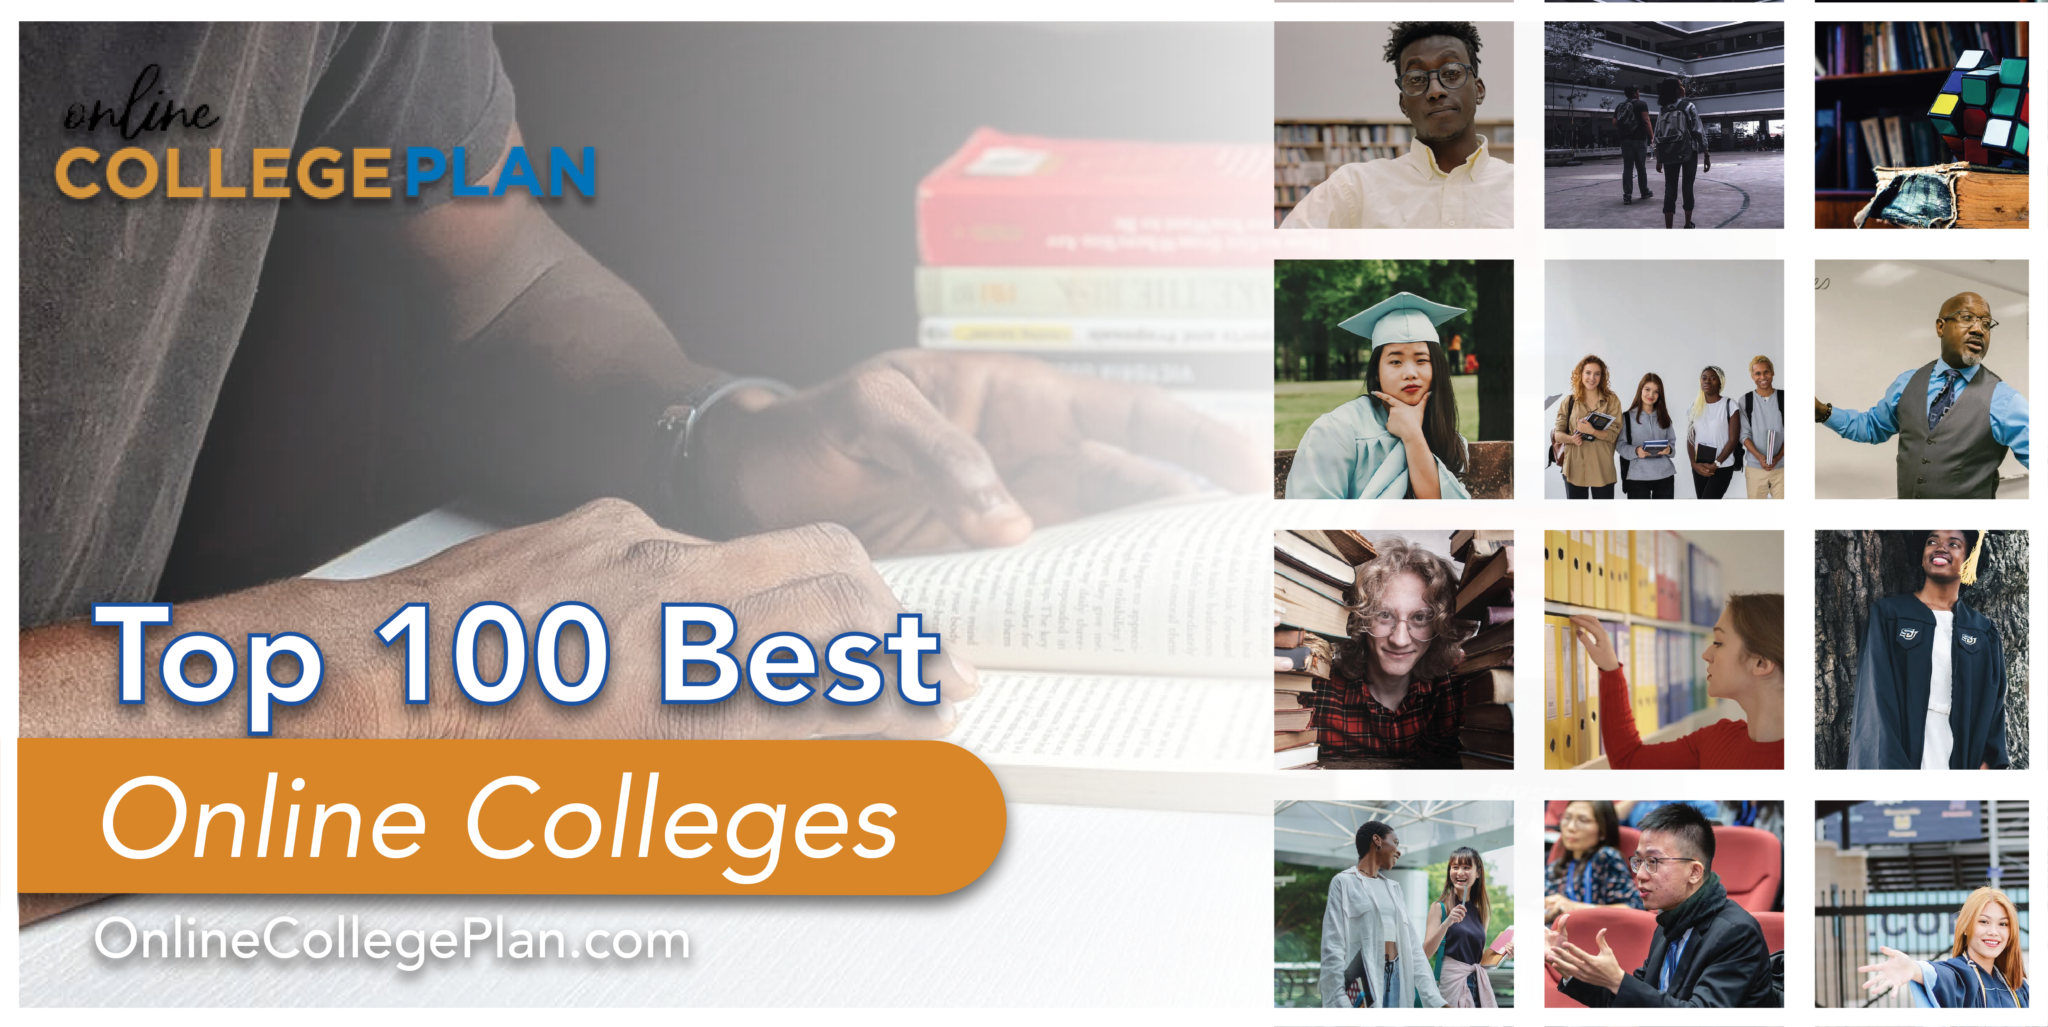 best most affordable online colleges